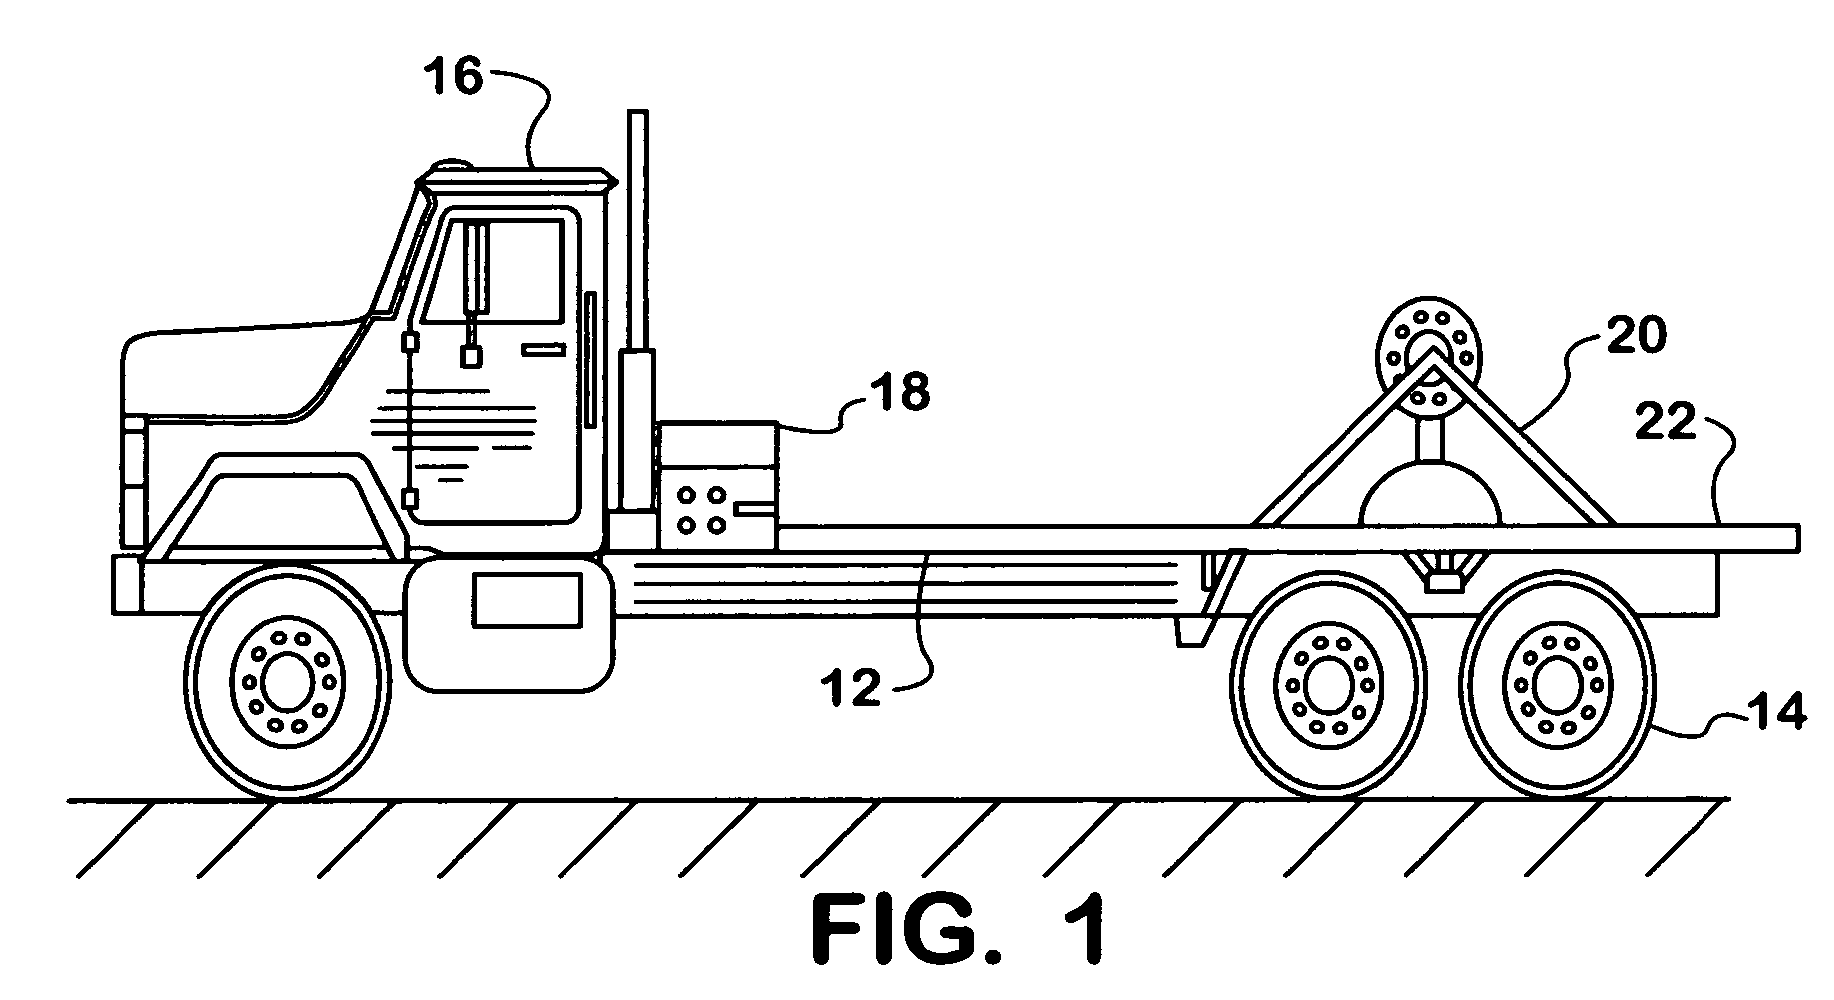 Automated vehicle battery protection with programmable load shedding and engine speed control